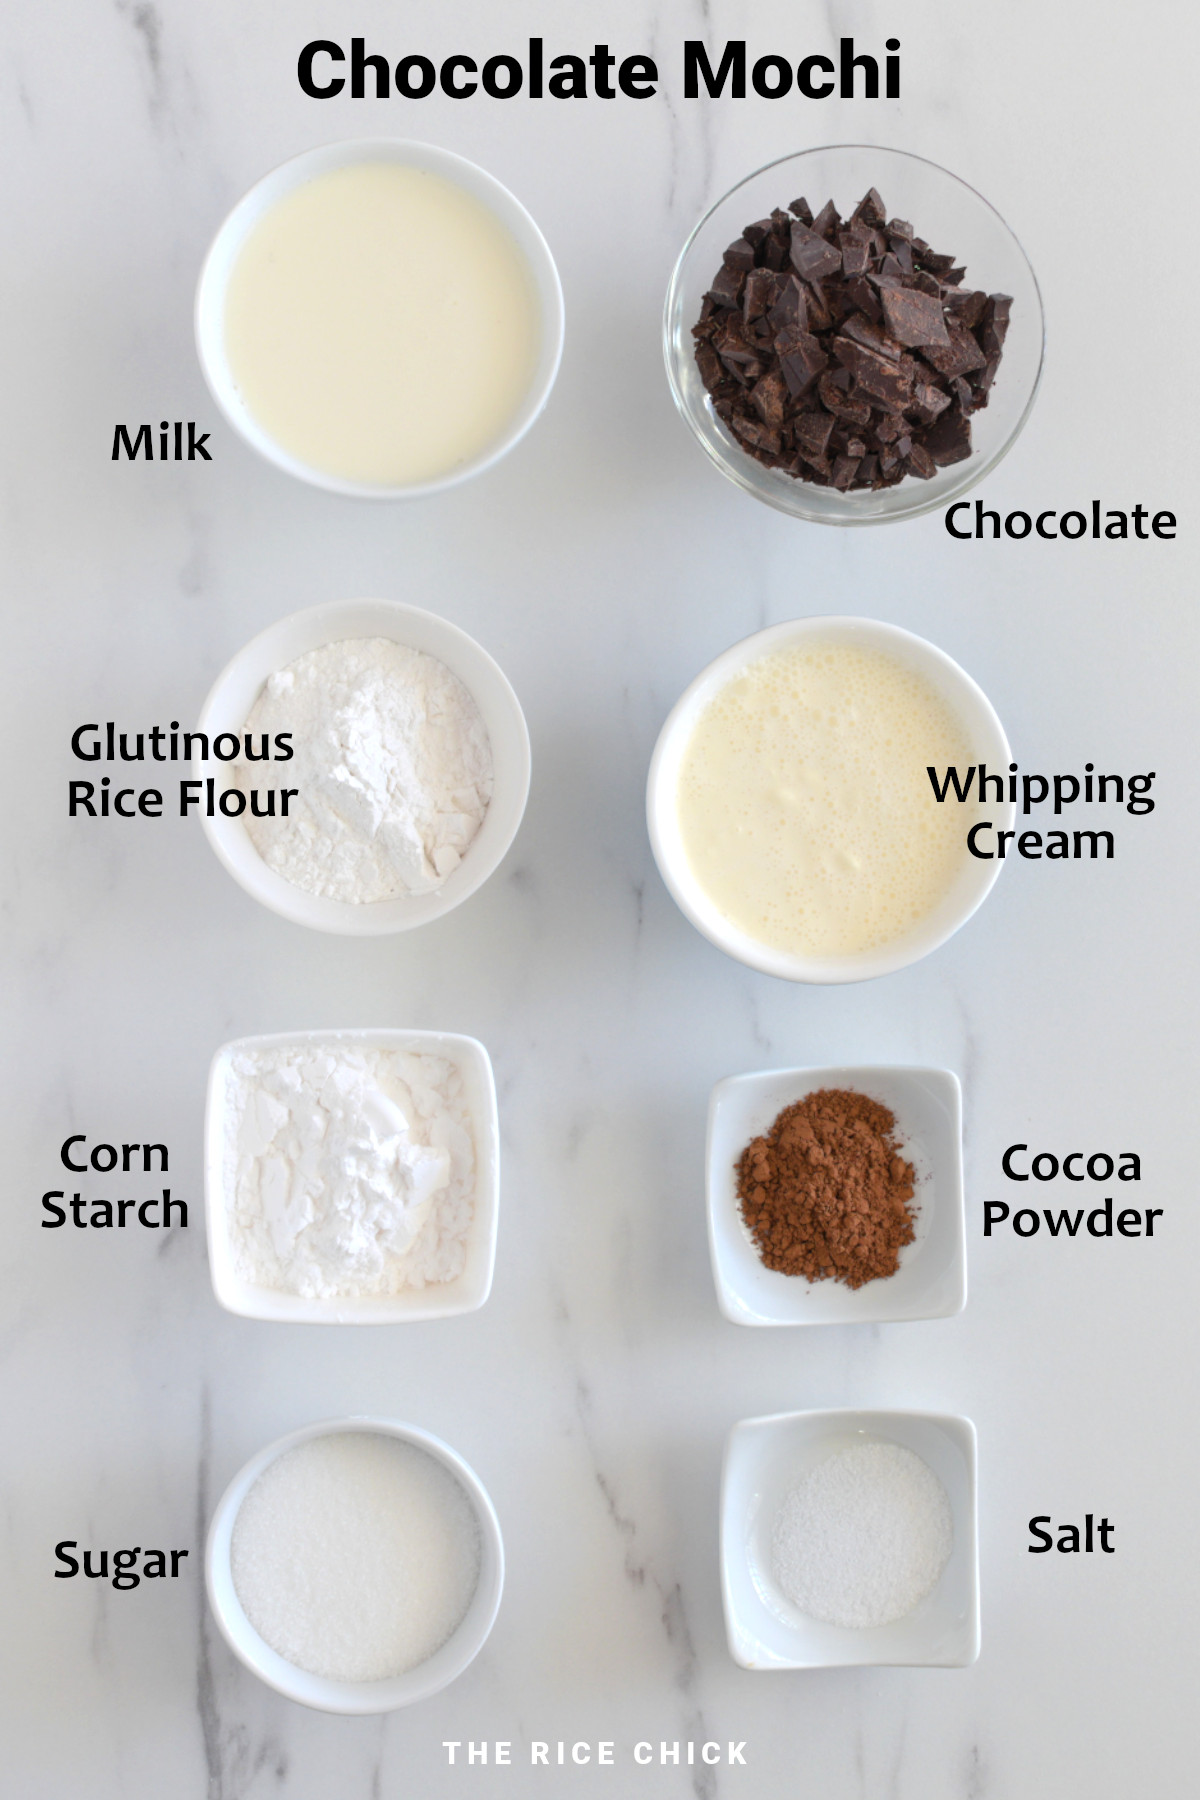 Ingredients used for chocolate mochi.